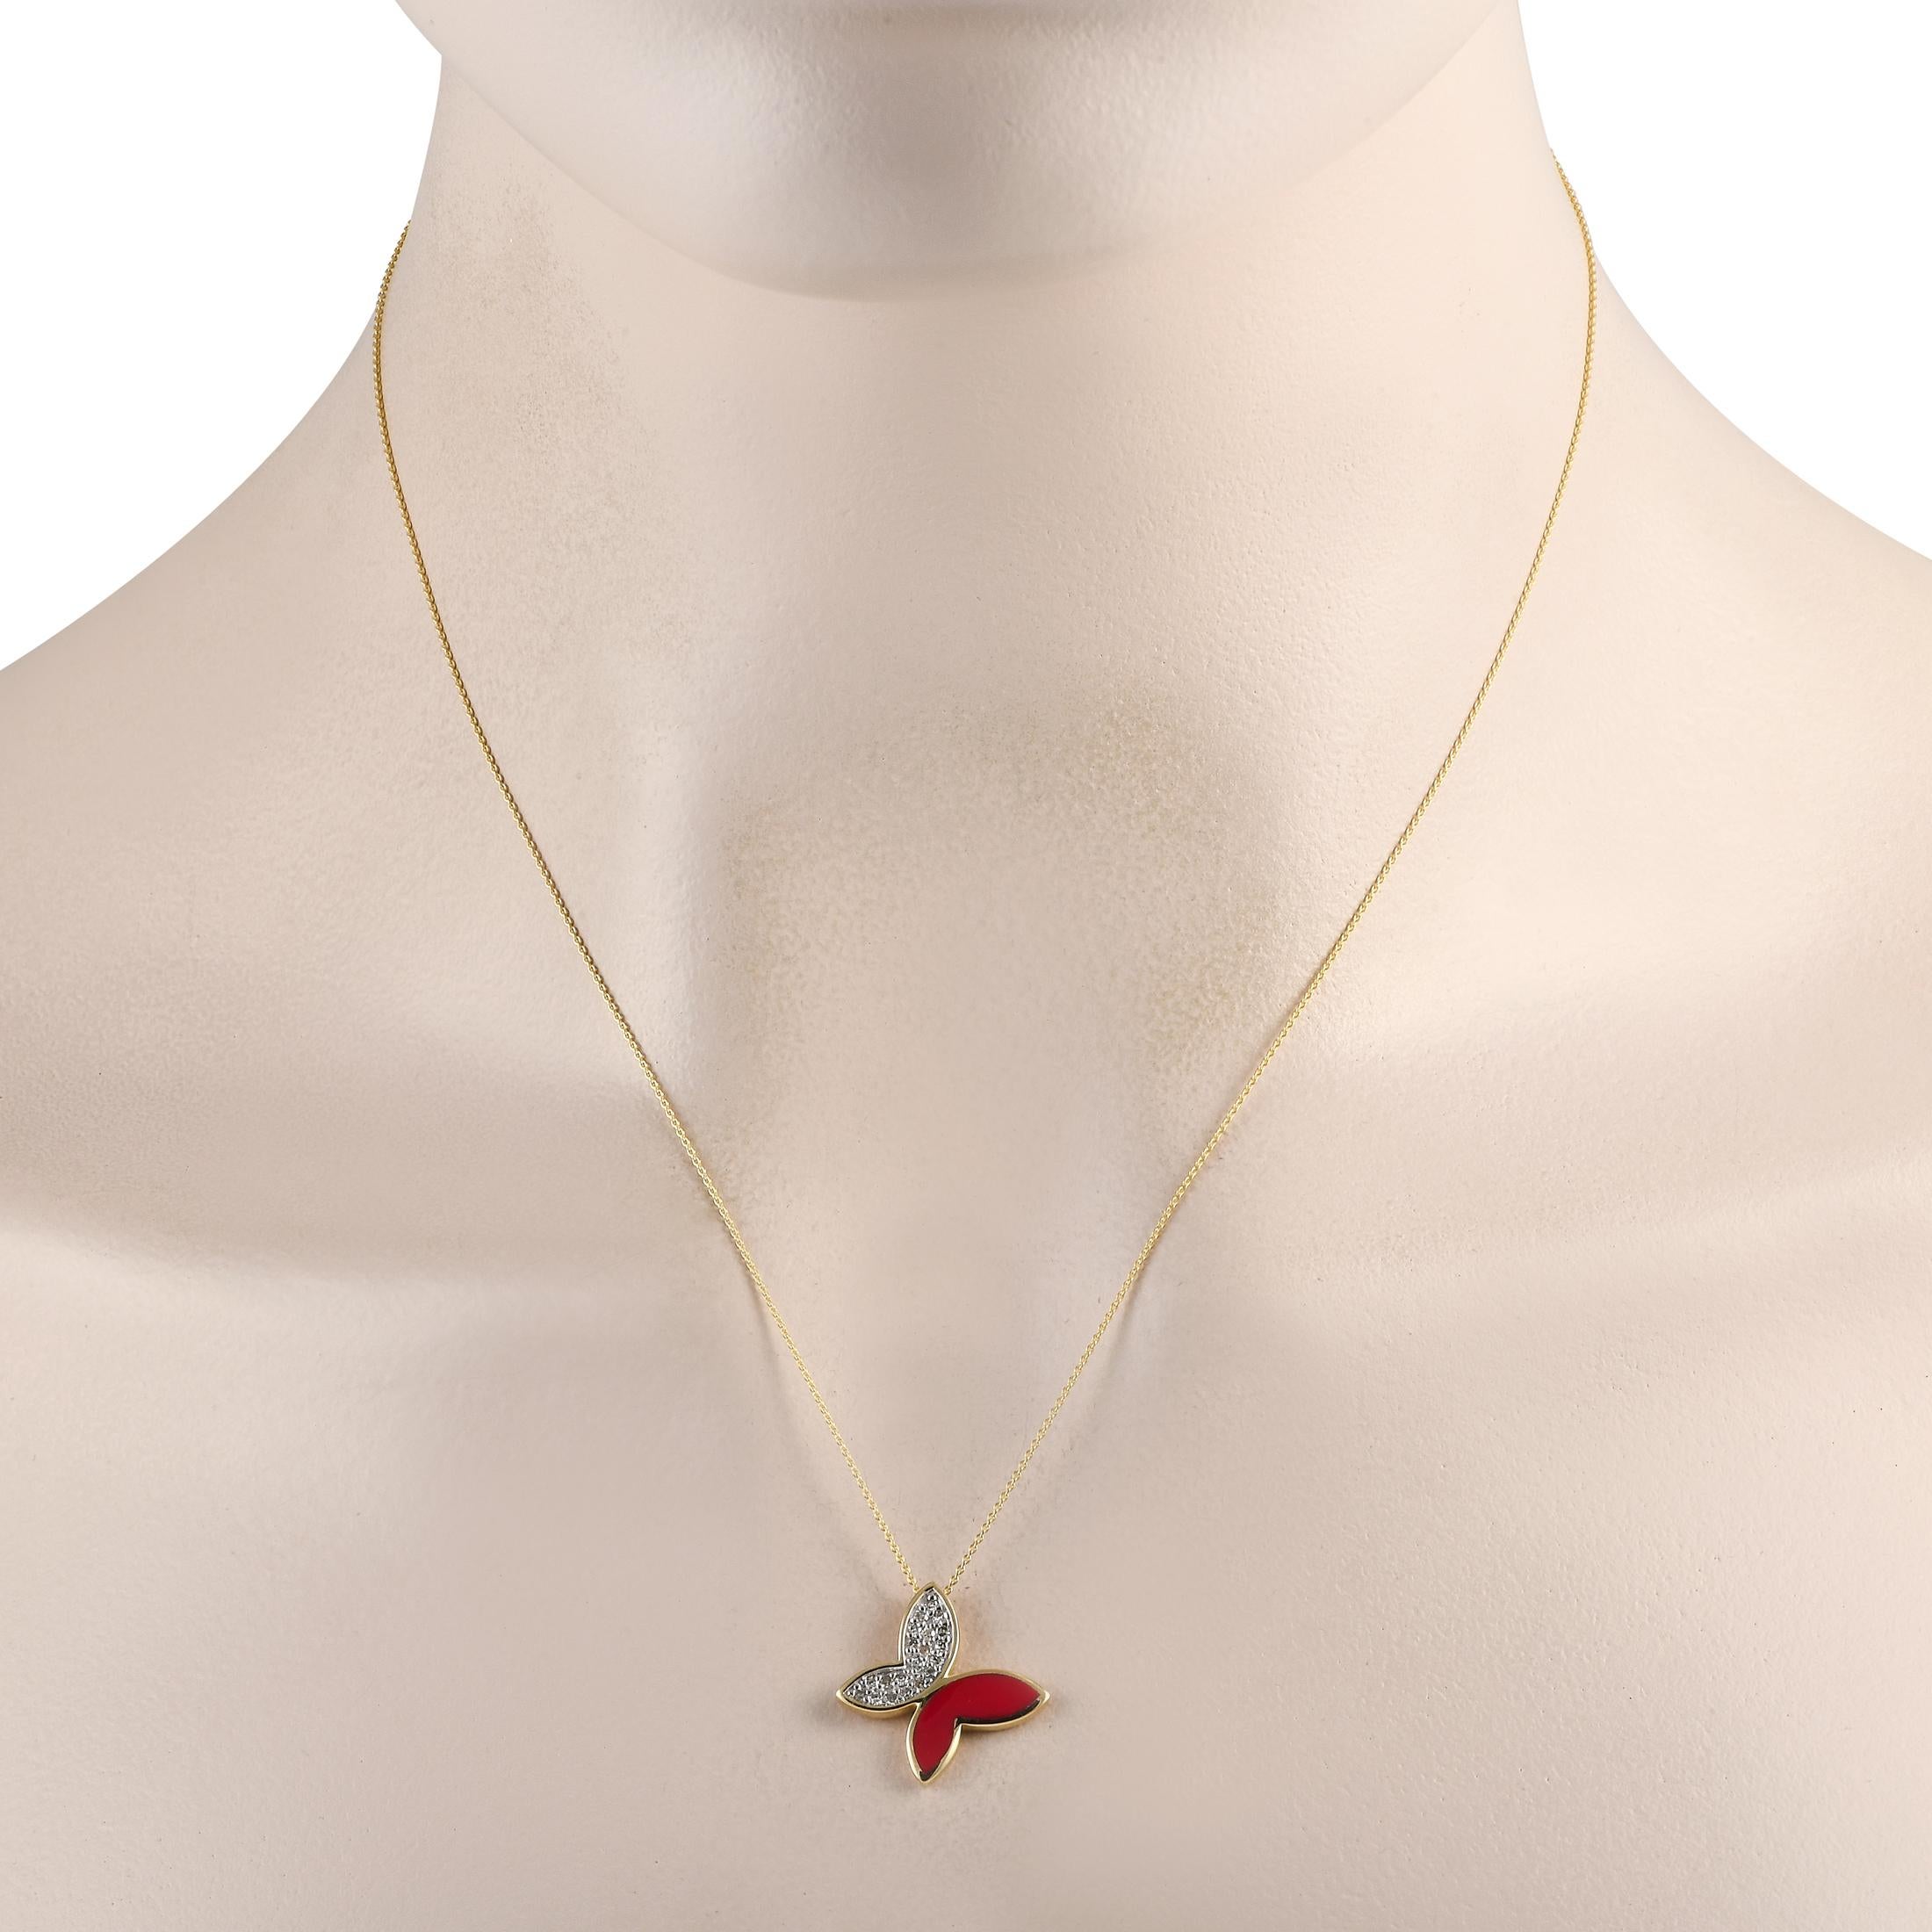 A red inlaid accent contrasts beautifully against inset Diamonds totaling 0.15 carats on this charming necklace. Crafted from 14K Yellow Gold, the butterfly shaped pendant measures 0.75 round and is suspended from an 18 chain.This jewelry piece is